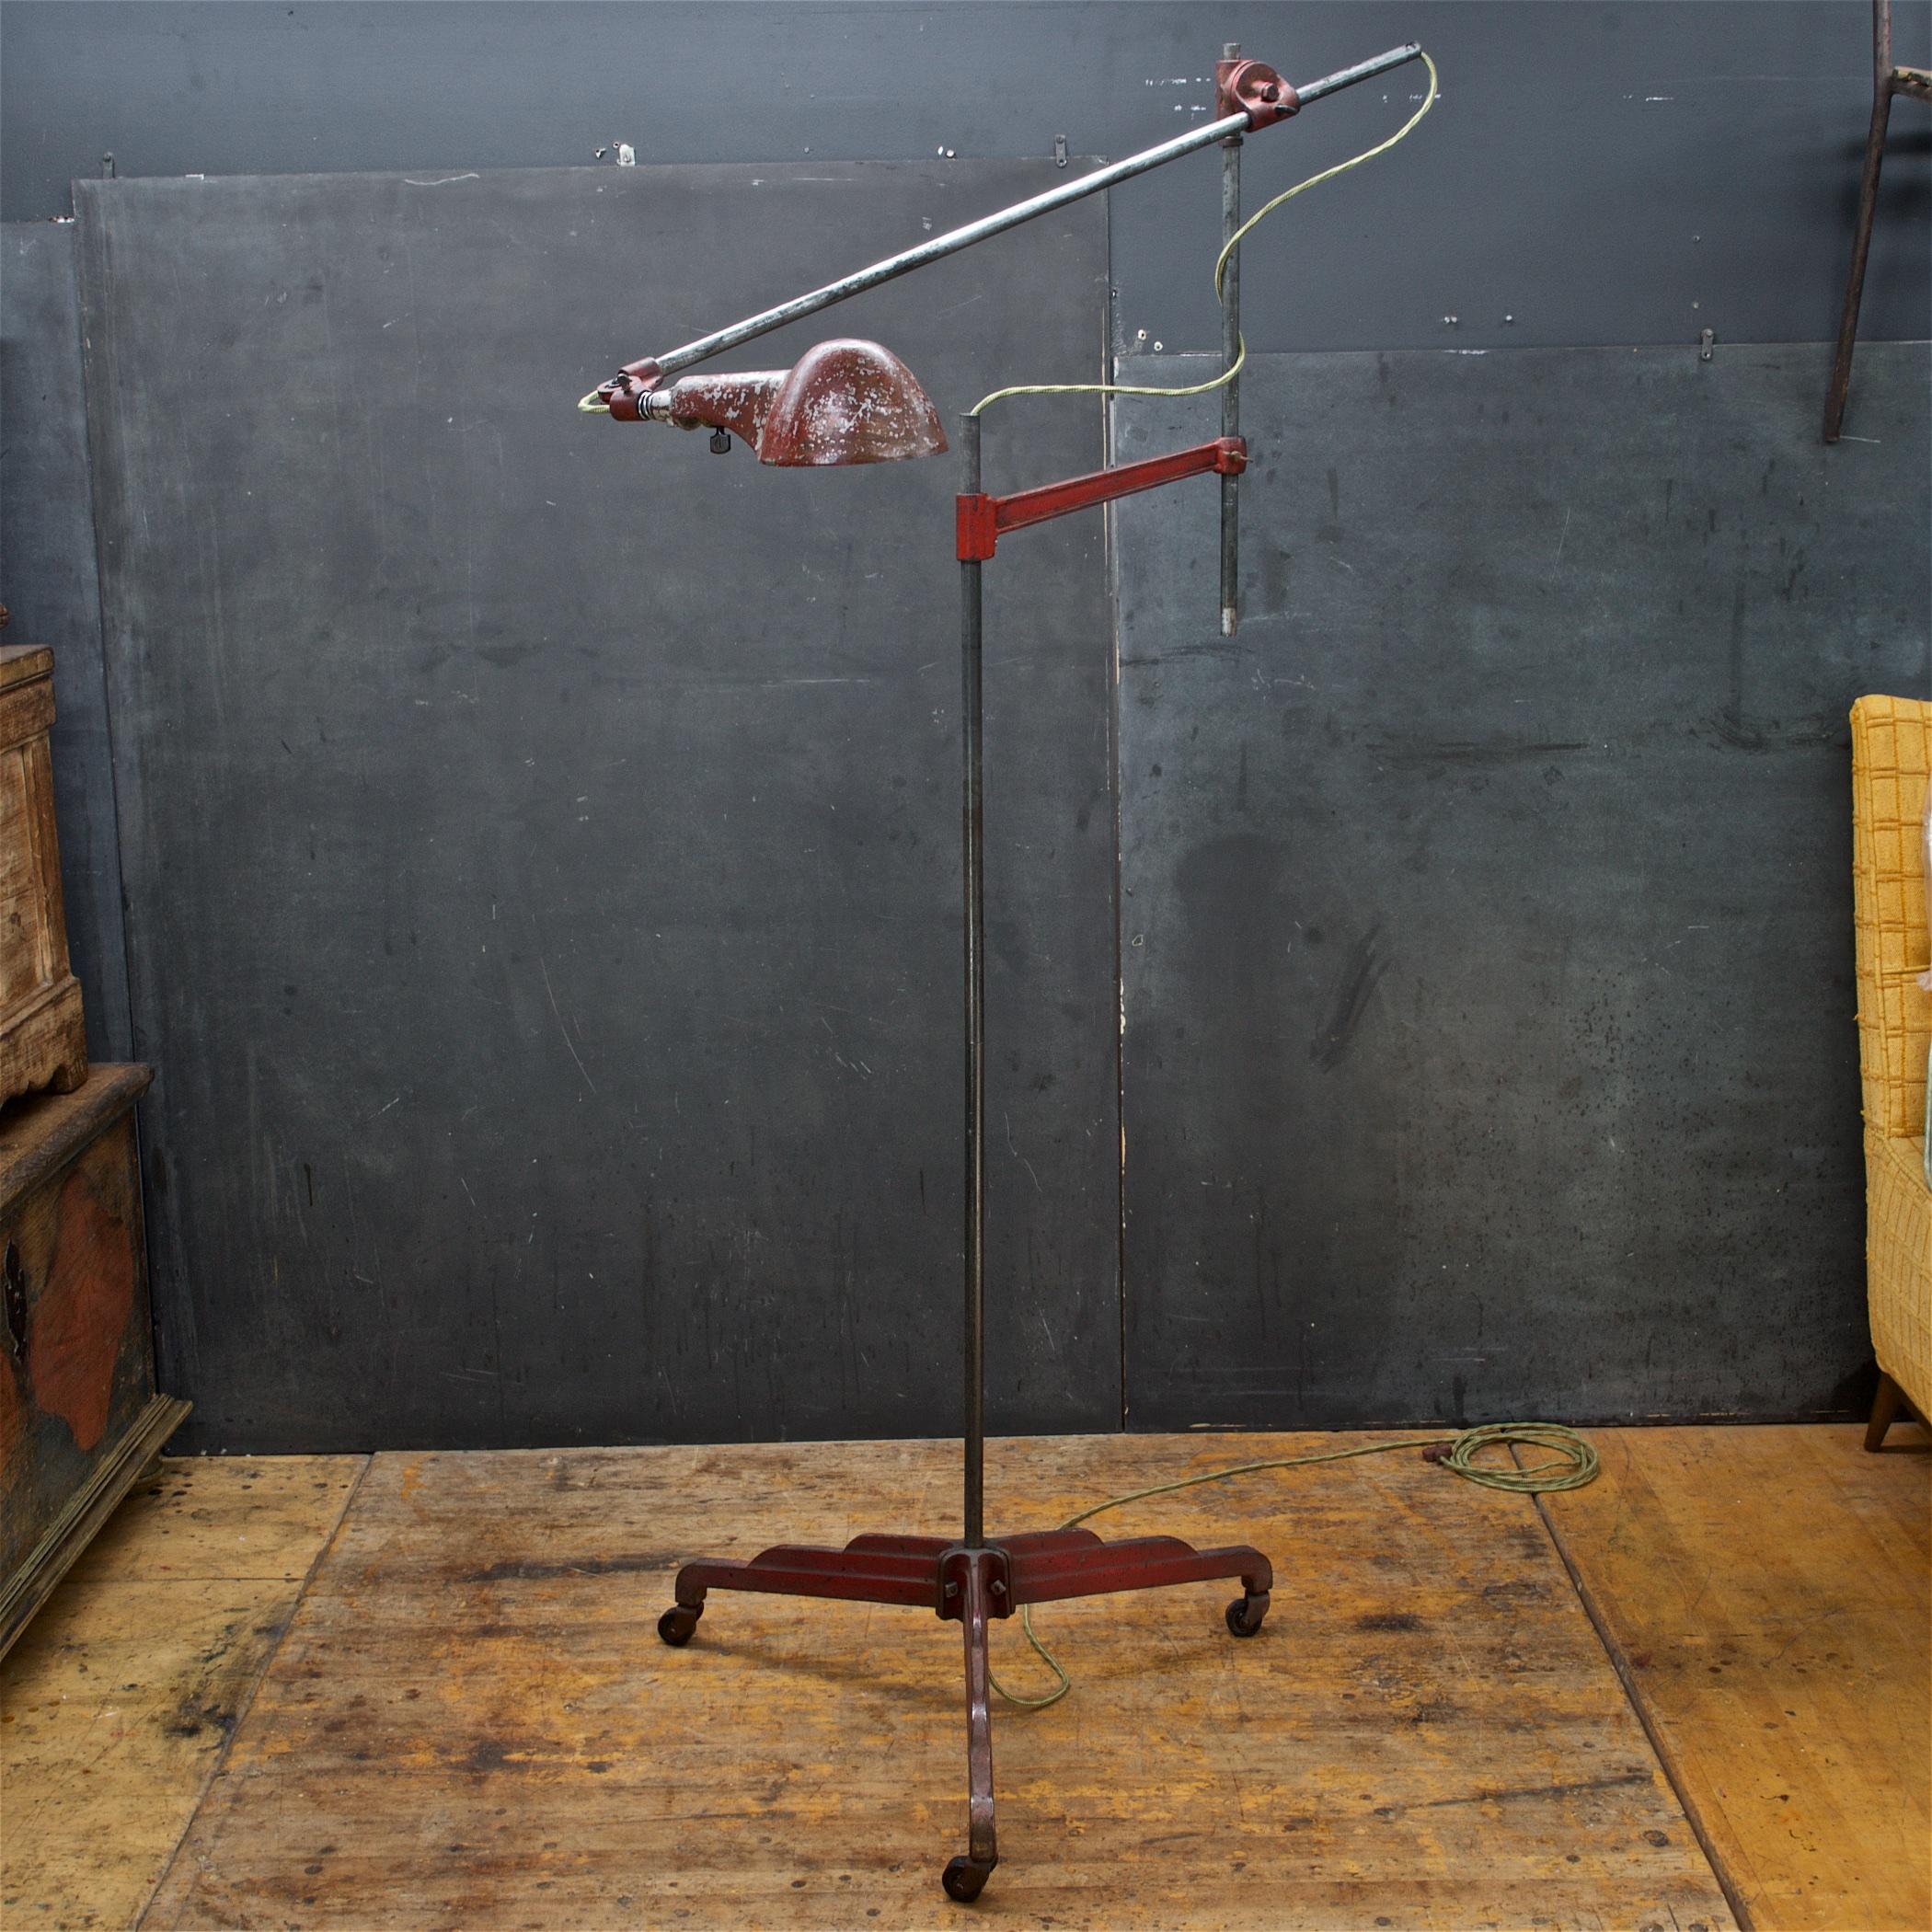 Highly adjustable lamp, a couple thumbscrews, articulate joint, a flathead screw, etc. to set lamp in any position. In the first image lamp is set at roughly 6.5 Feet by 3.5 Feet wide, and base is 27 inches deep.

Designed and patented by William